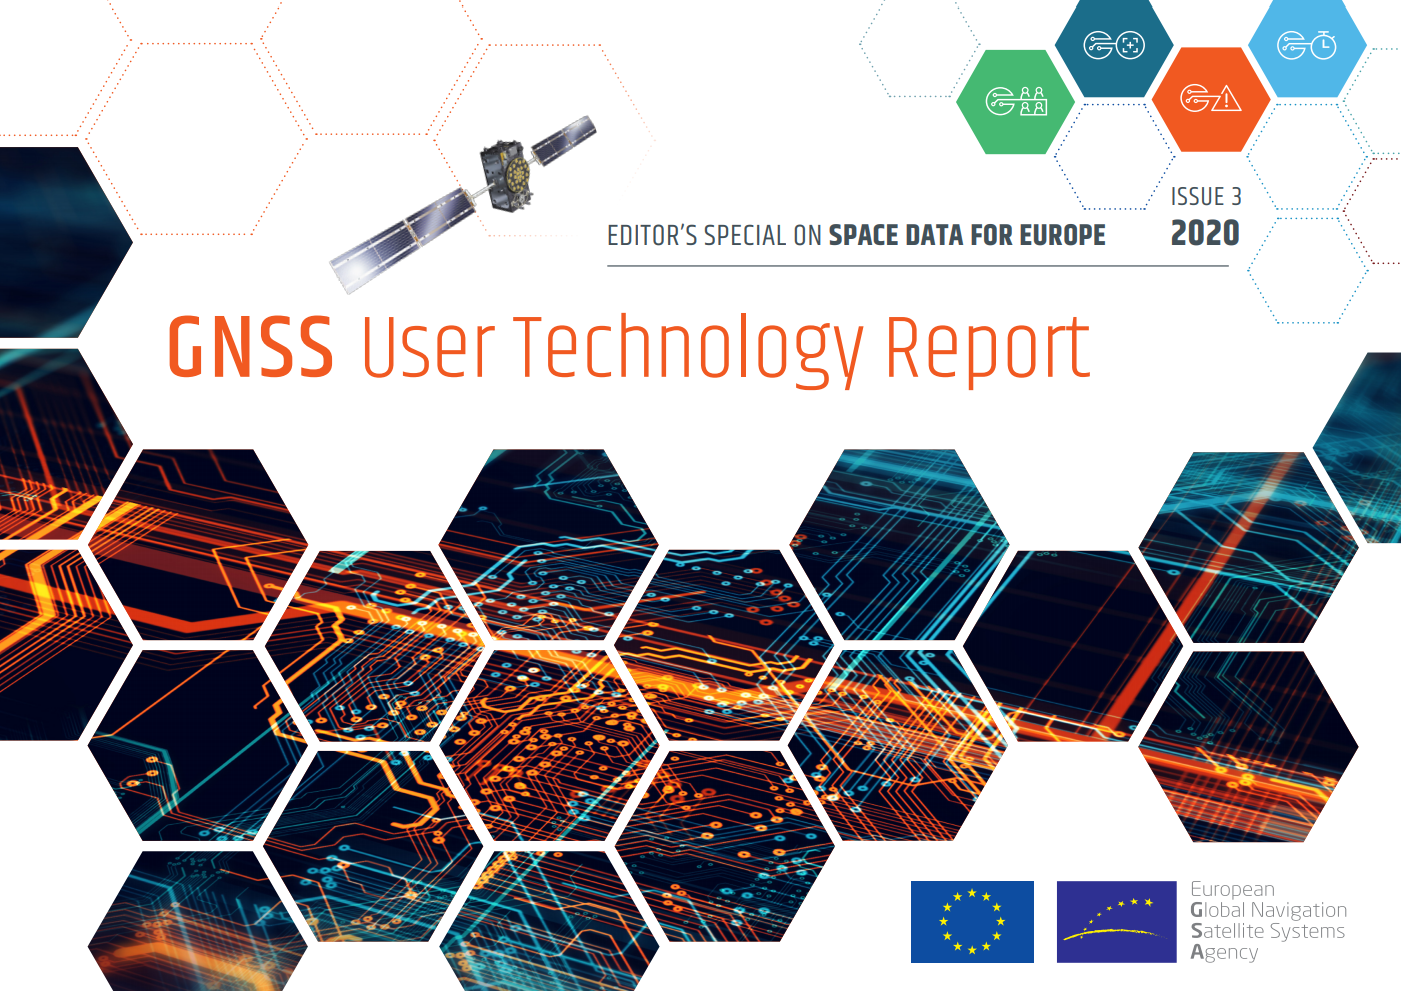 The latest edition of the GNSS User Technology Report is out!